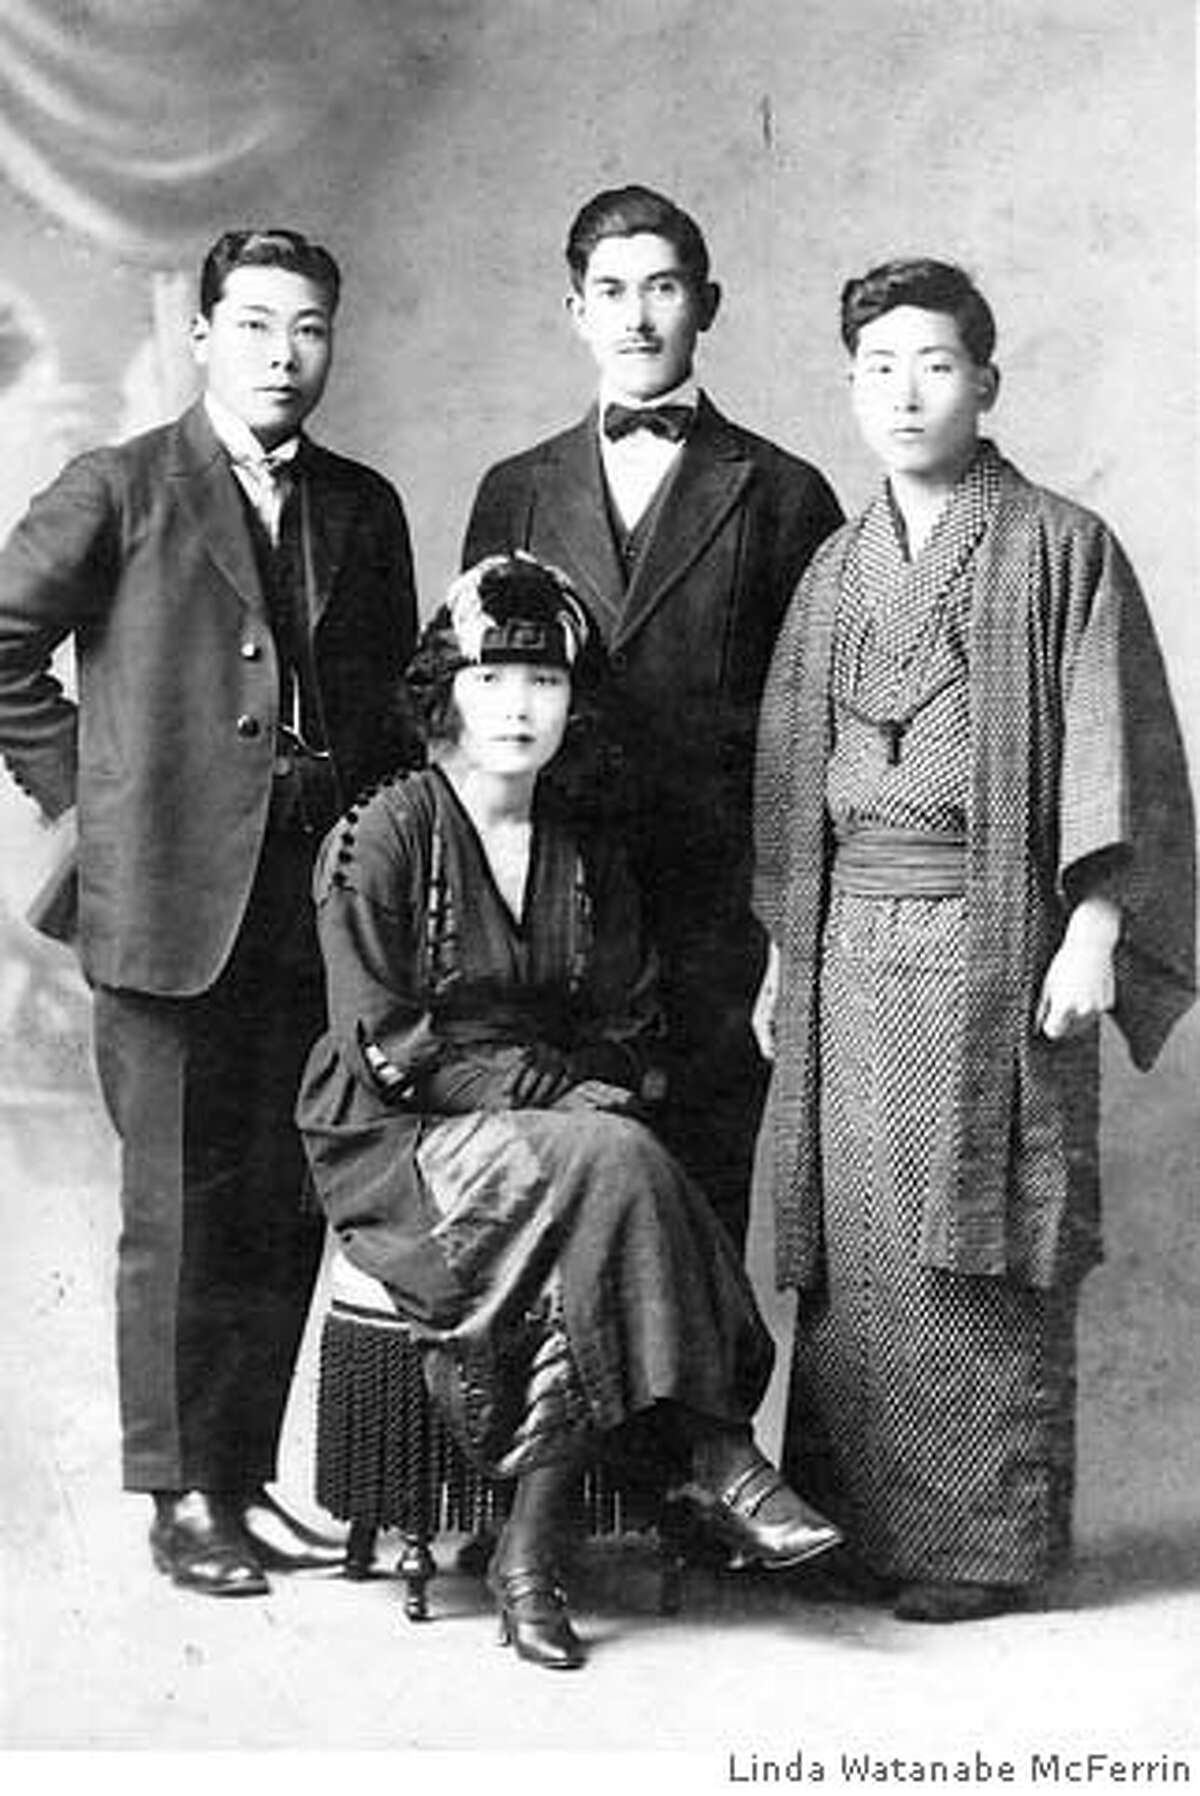 Watanabe family portrait: Tokue (the author's grandmother) and her brothers. Photo courtesy of Linda Watanabe McFerrin